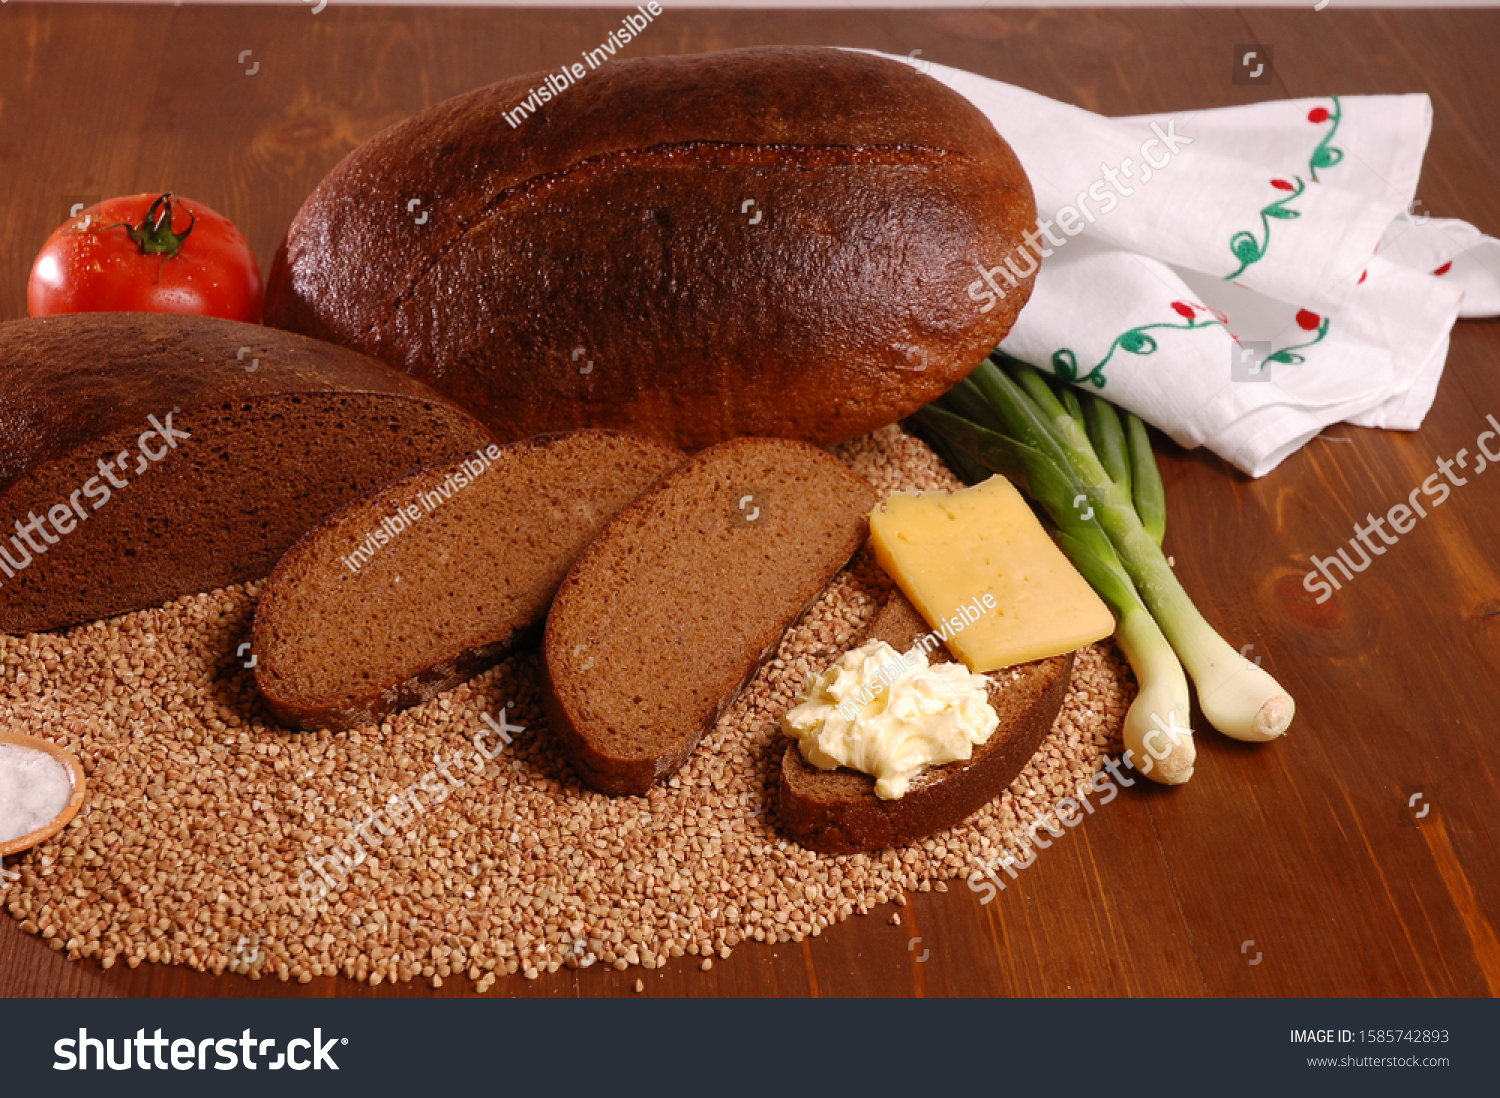 Rye bread. Rye bread with ingredients on a wooden table. #1585742893